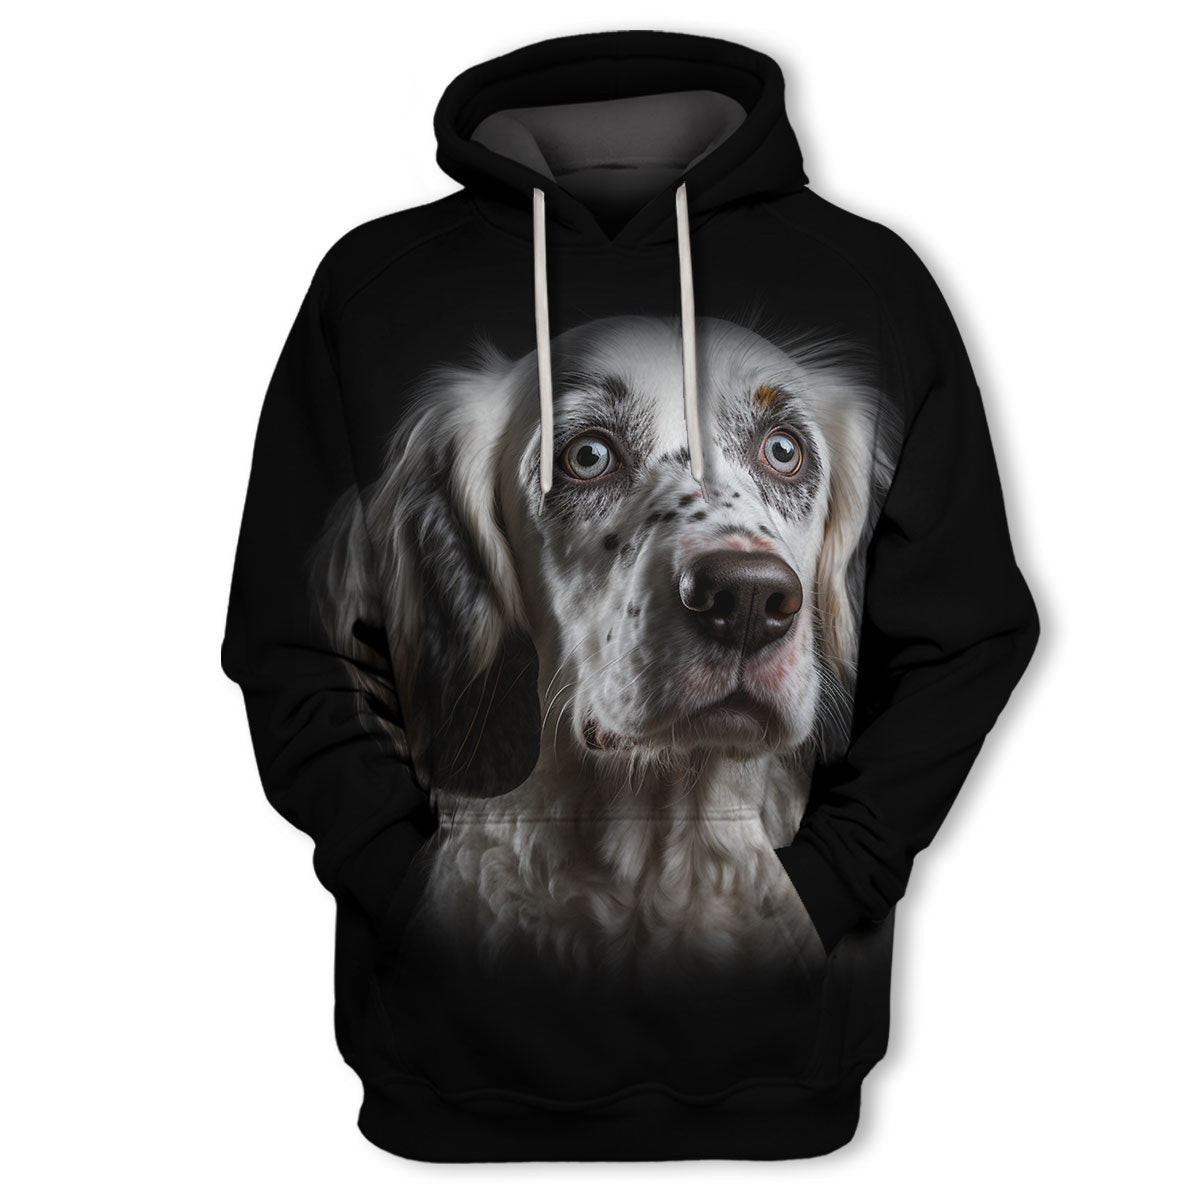 English Setter - Unisex 3D Graphic Hoodie